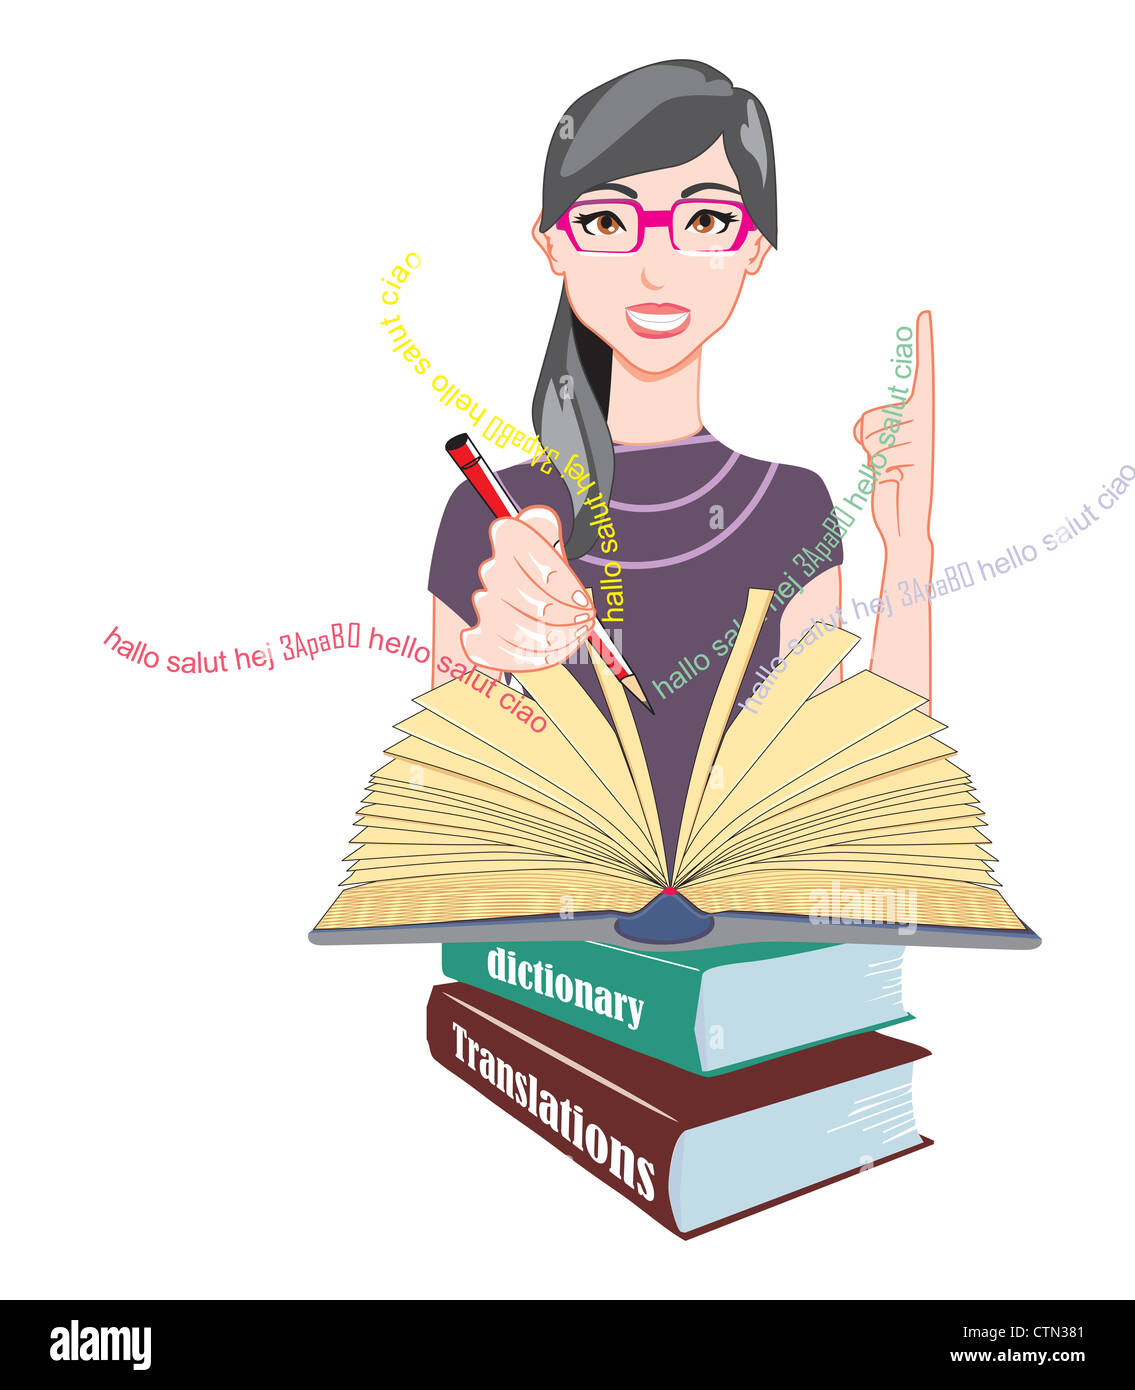 Word Meanings and Translations, Girl with Glasses with Reference Books, Holding a Red Pencil, vector illustration Stock Photo